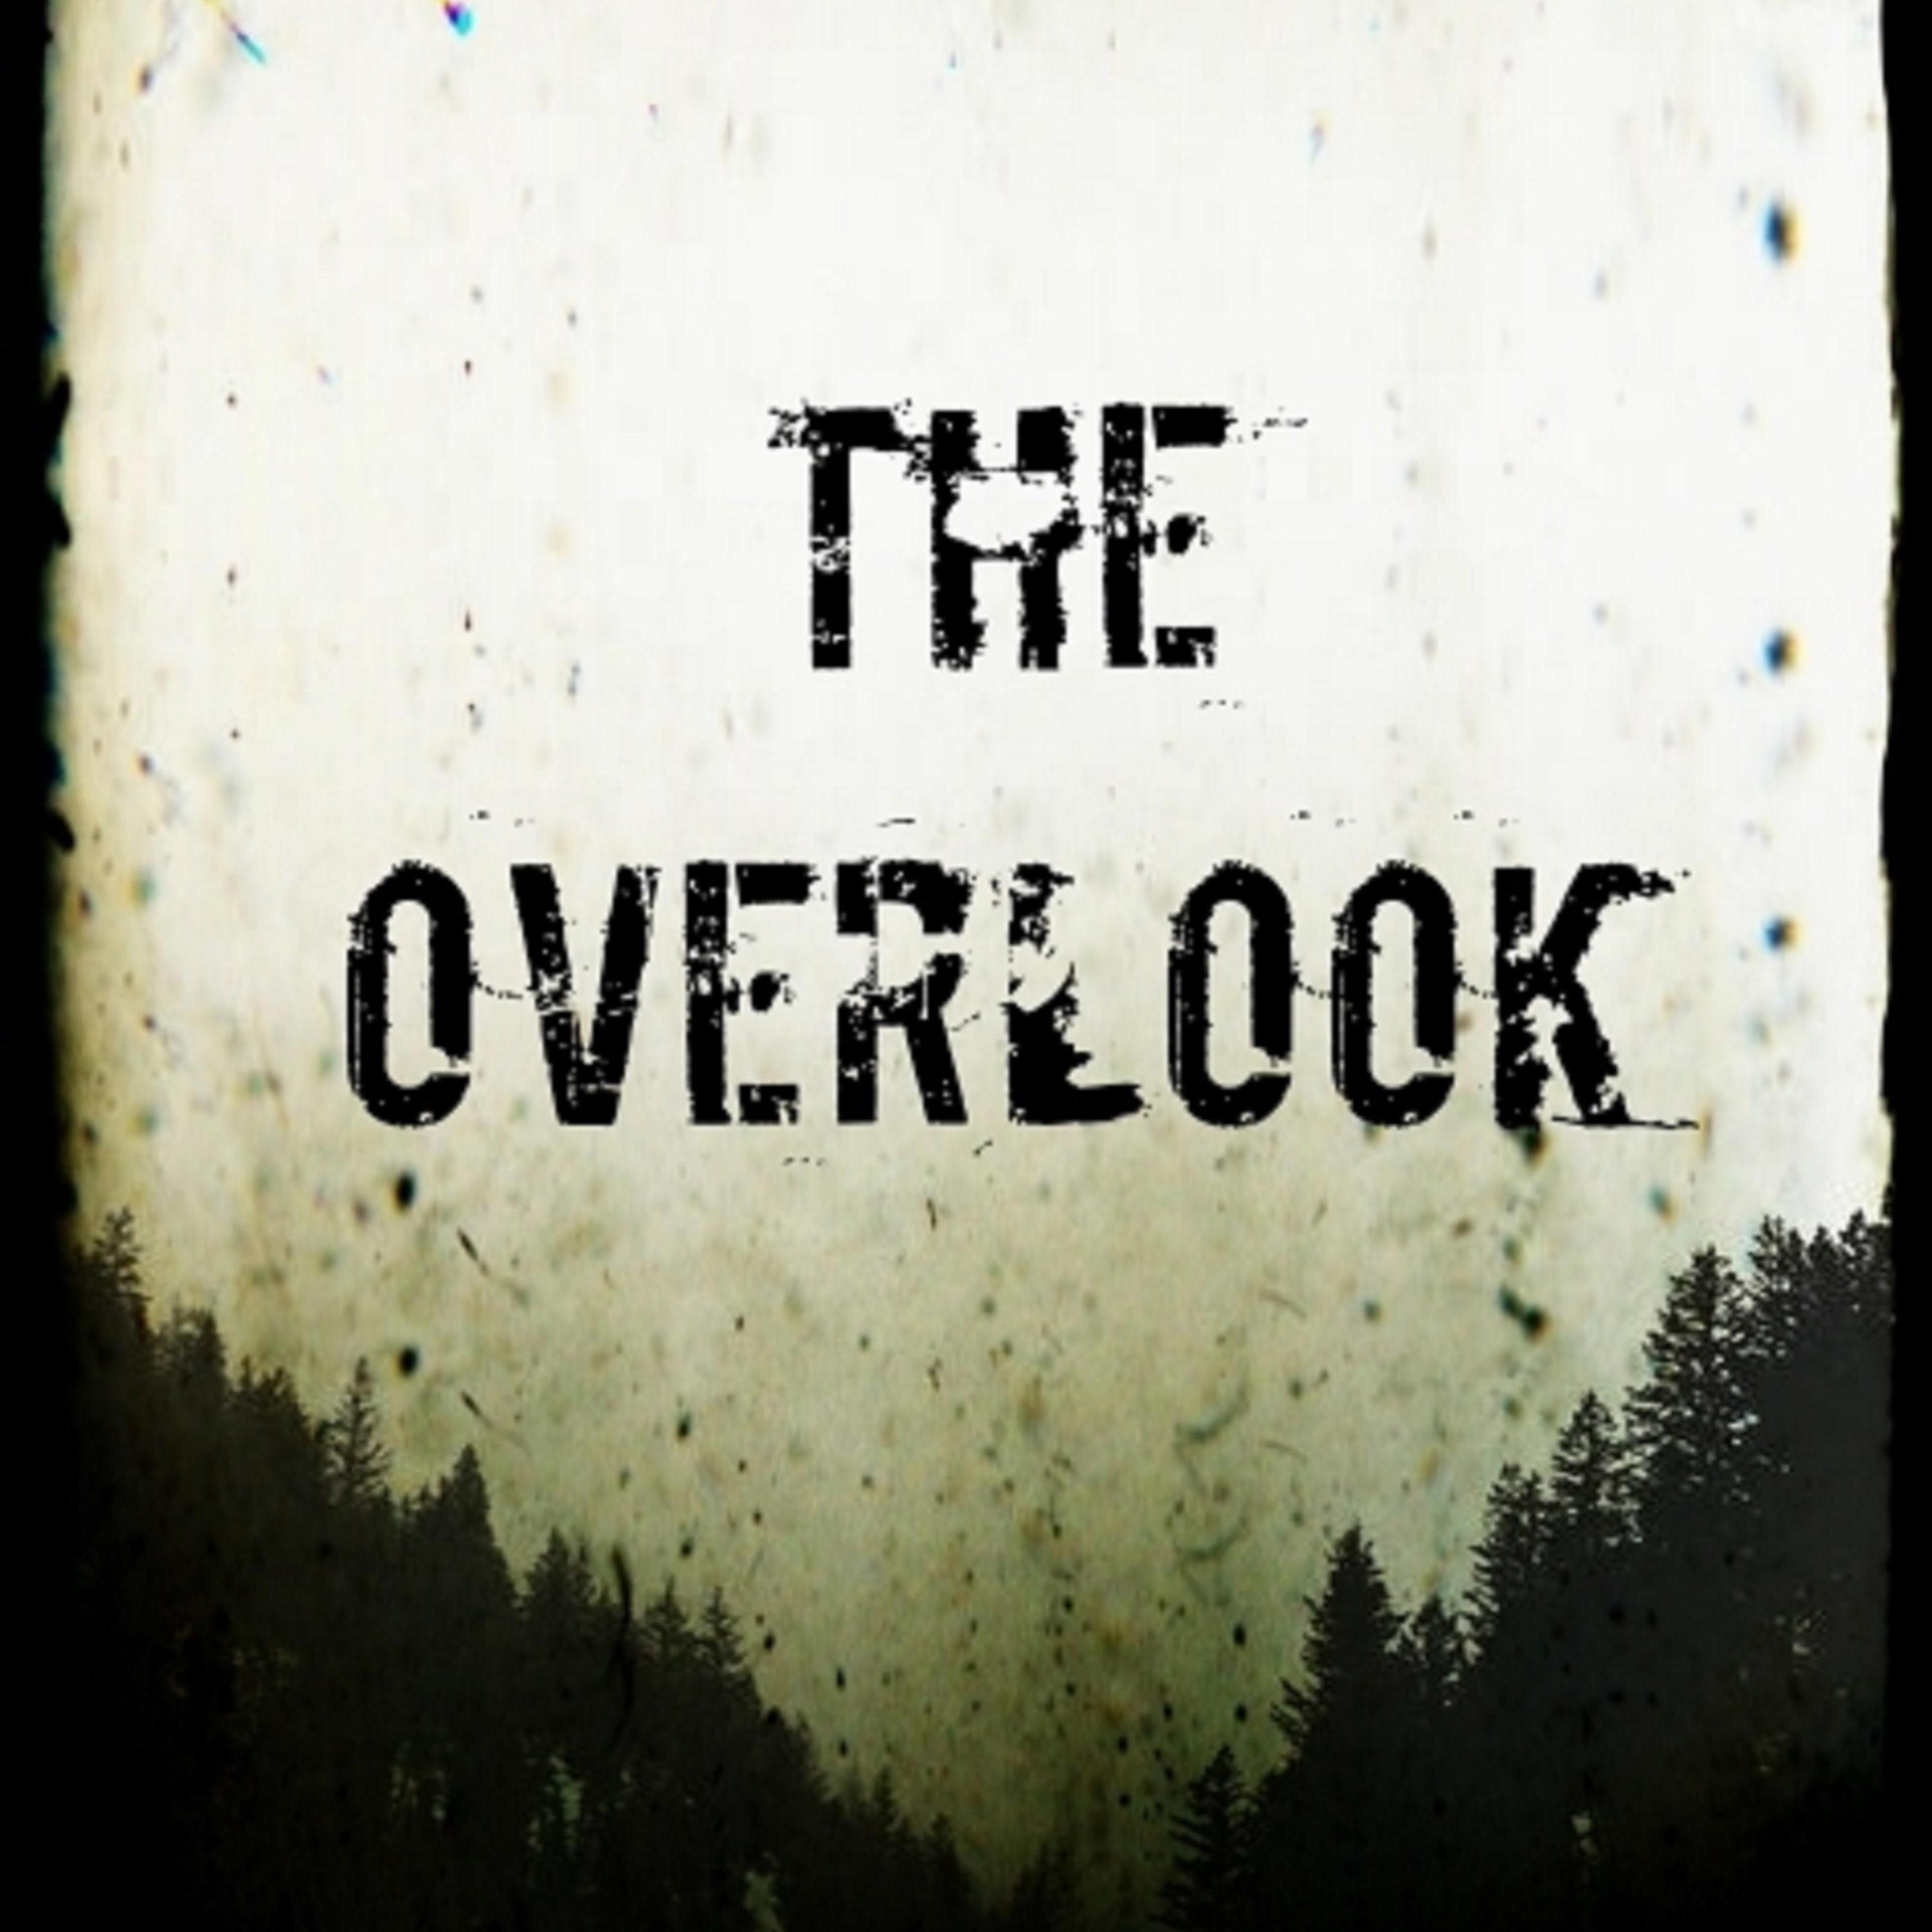 The Overlook podcast show image